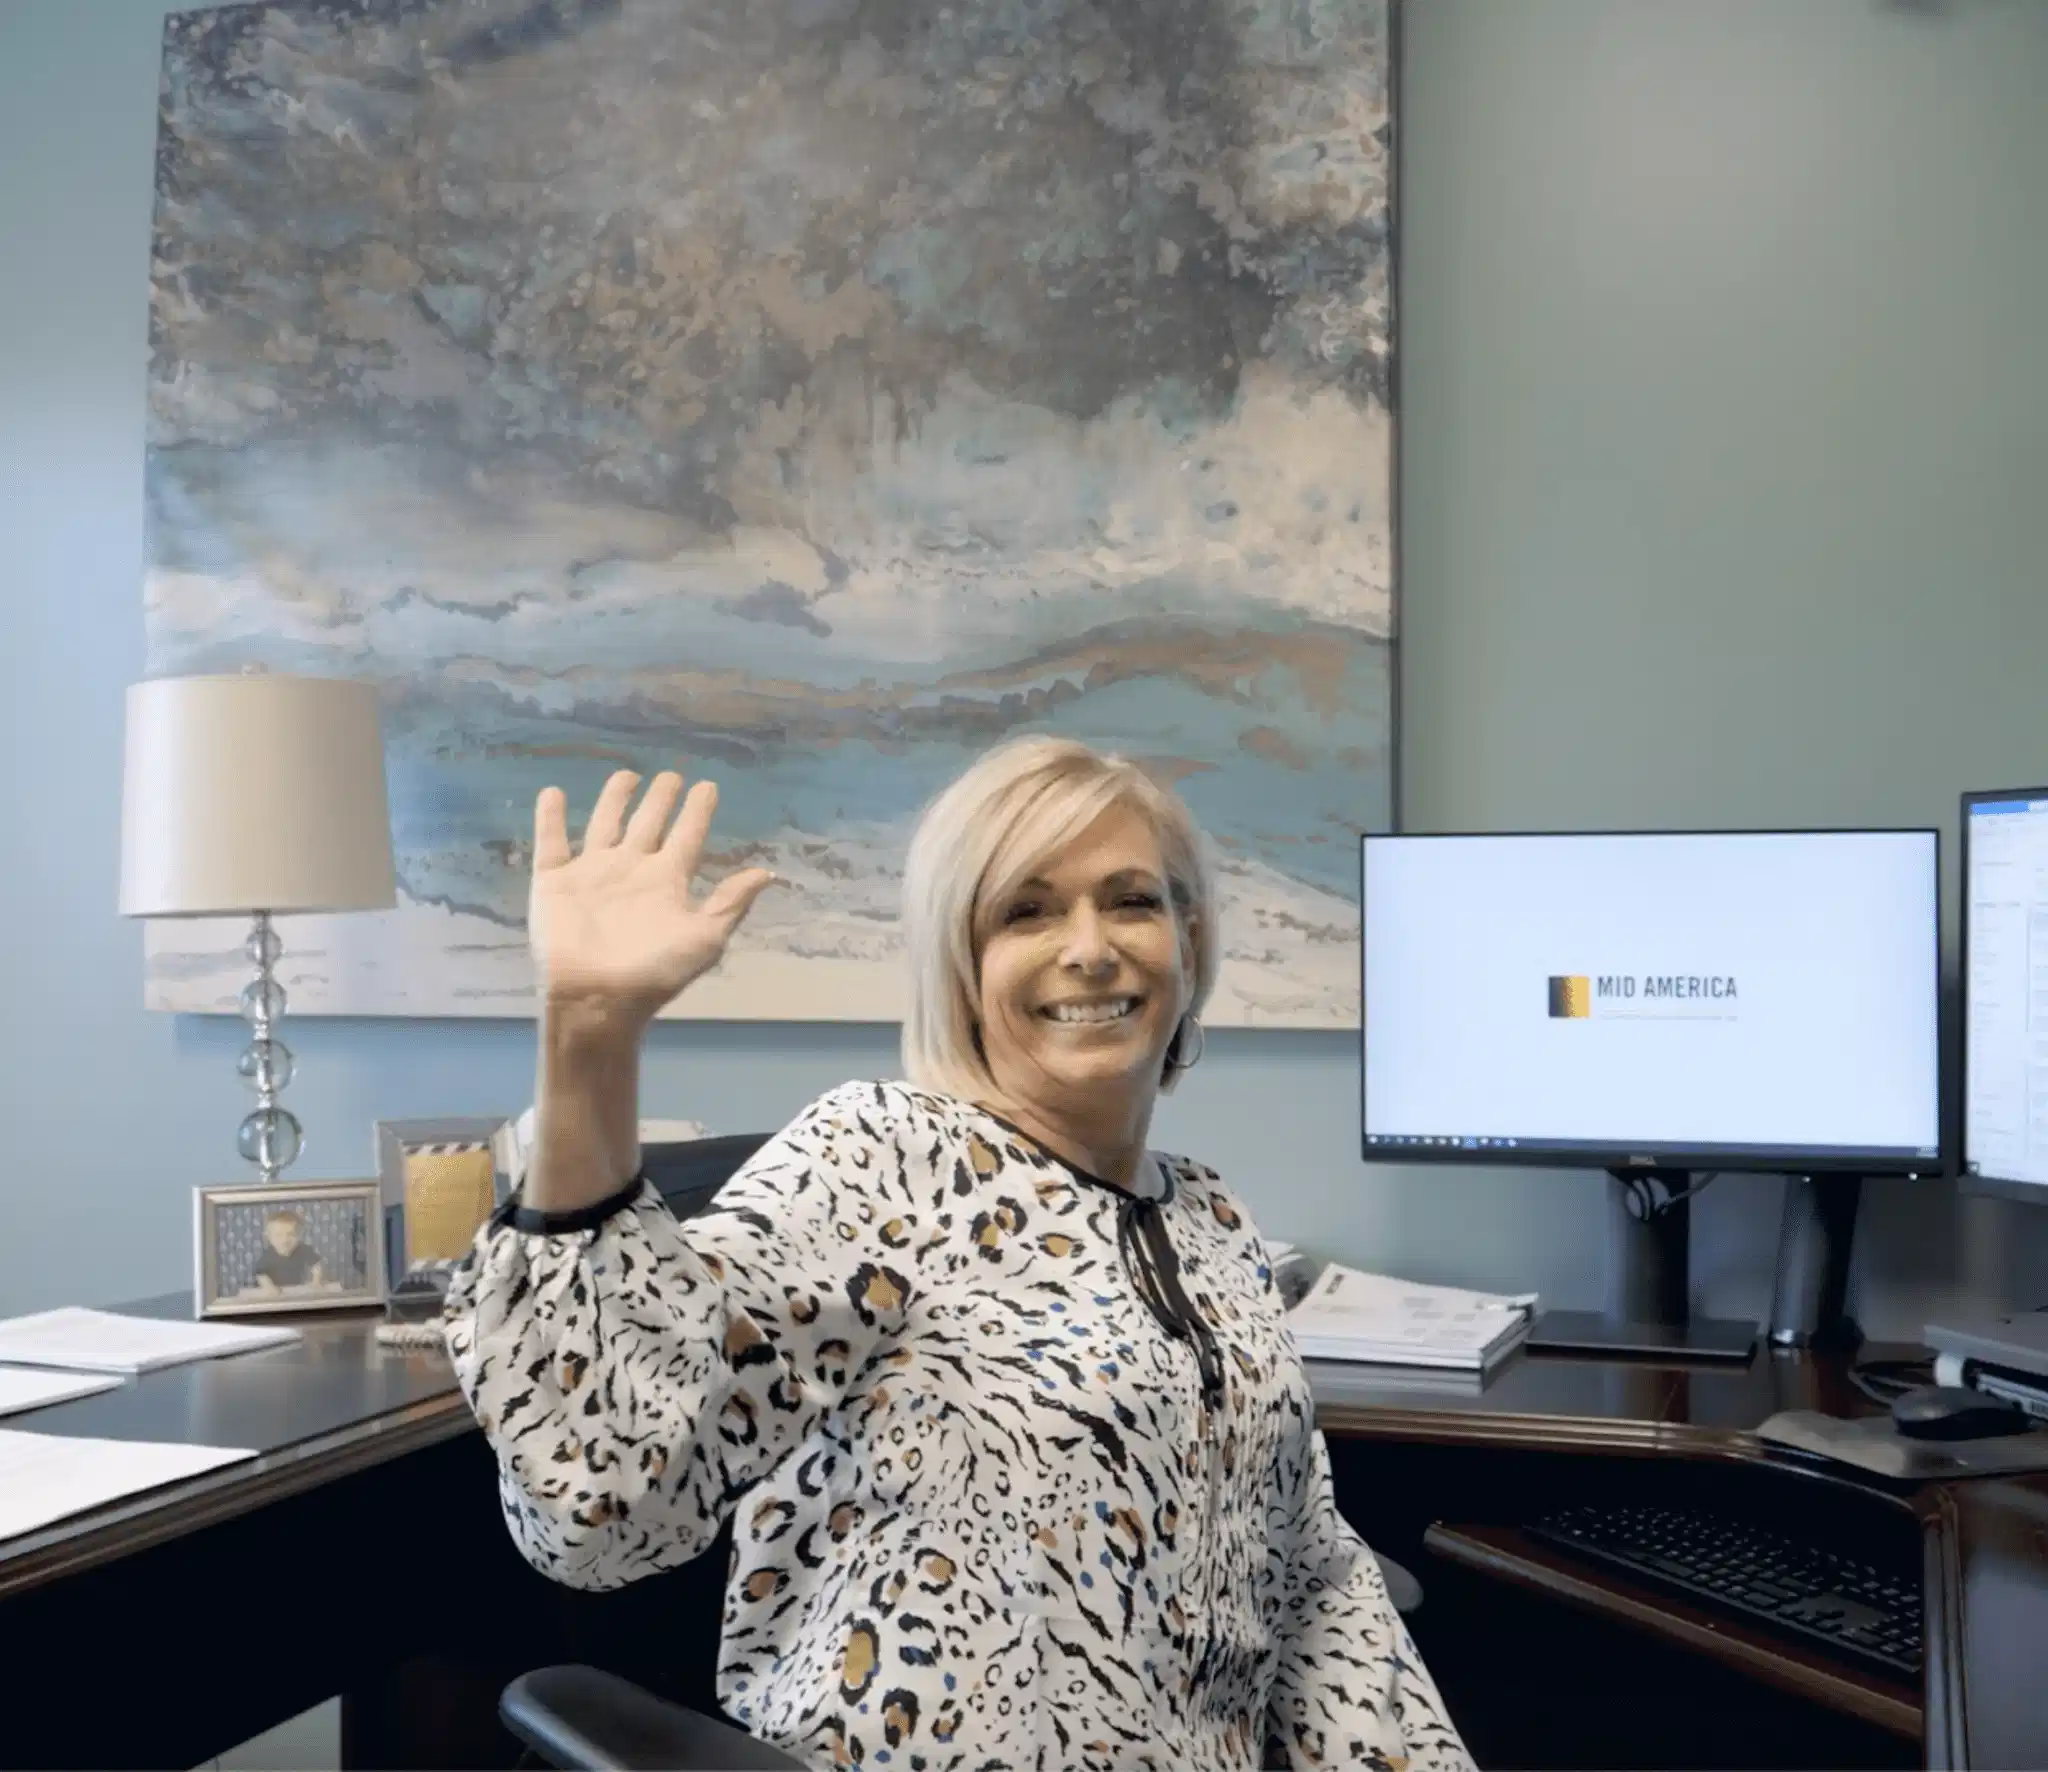 Female employee smiling and waving at camera from her desk